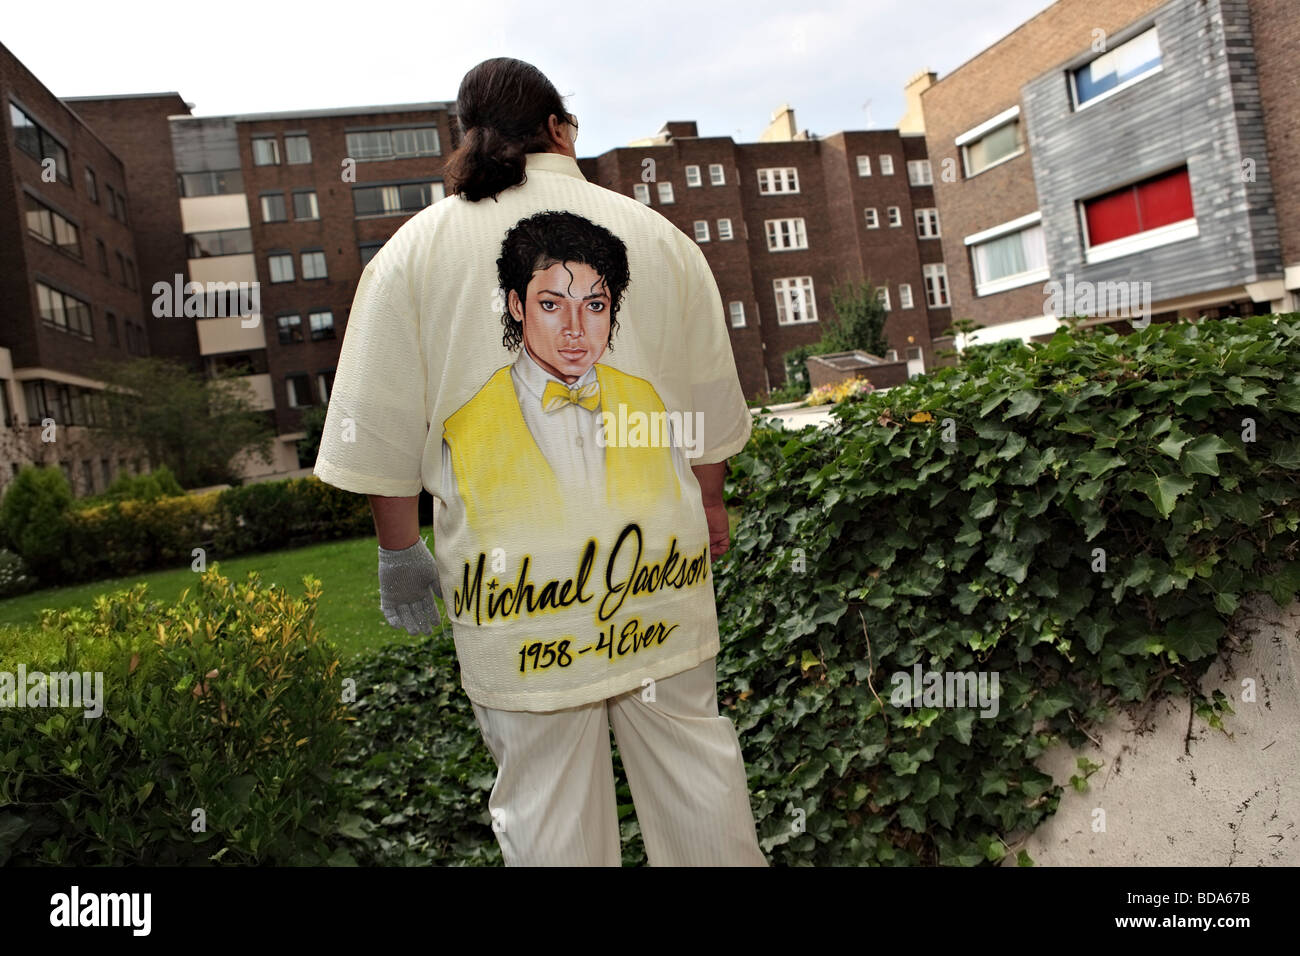 Michael Jackson's fan poses with customized shirt within a UK courtyard. Stock Photo